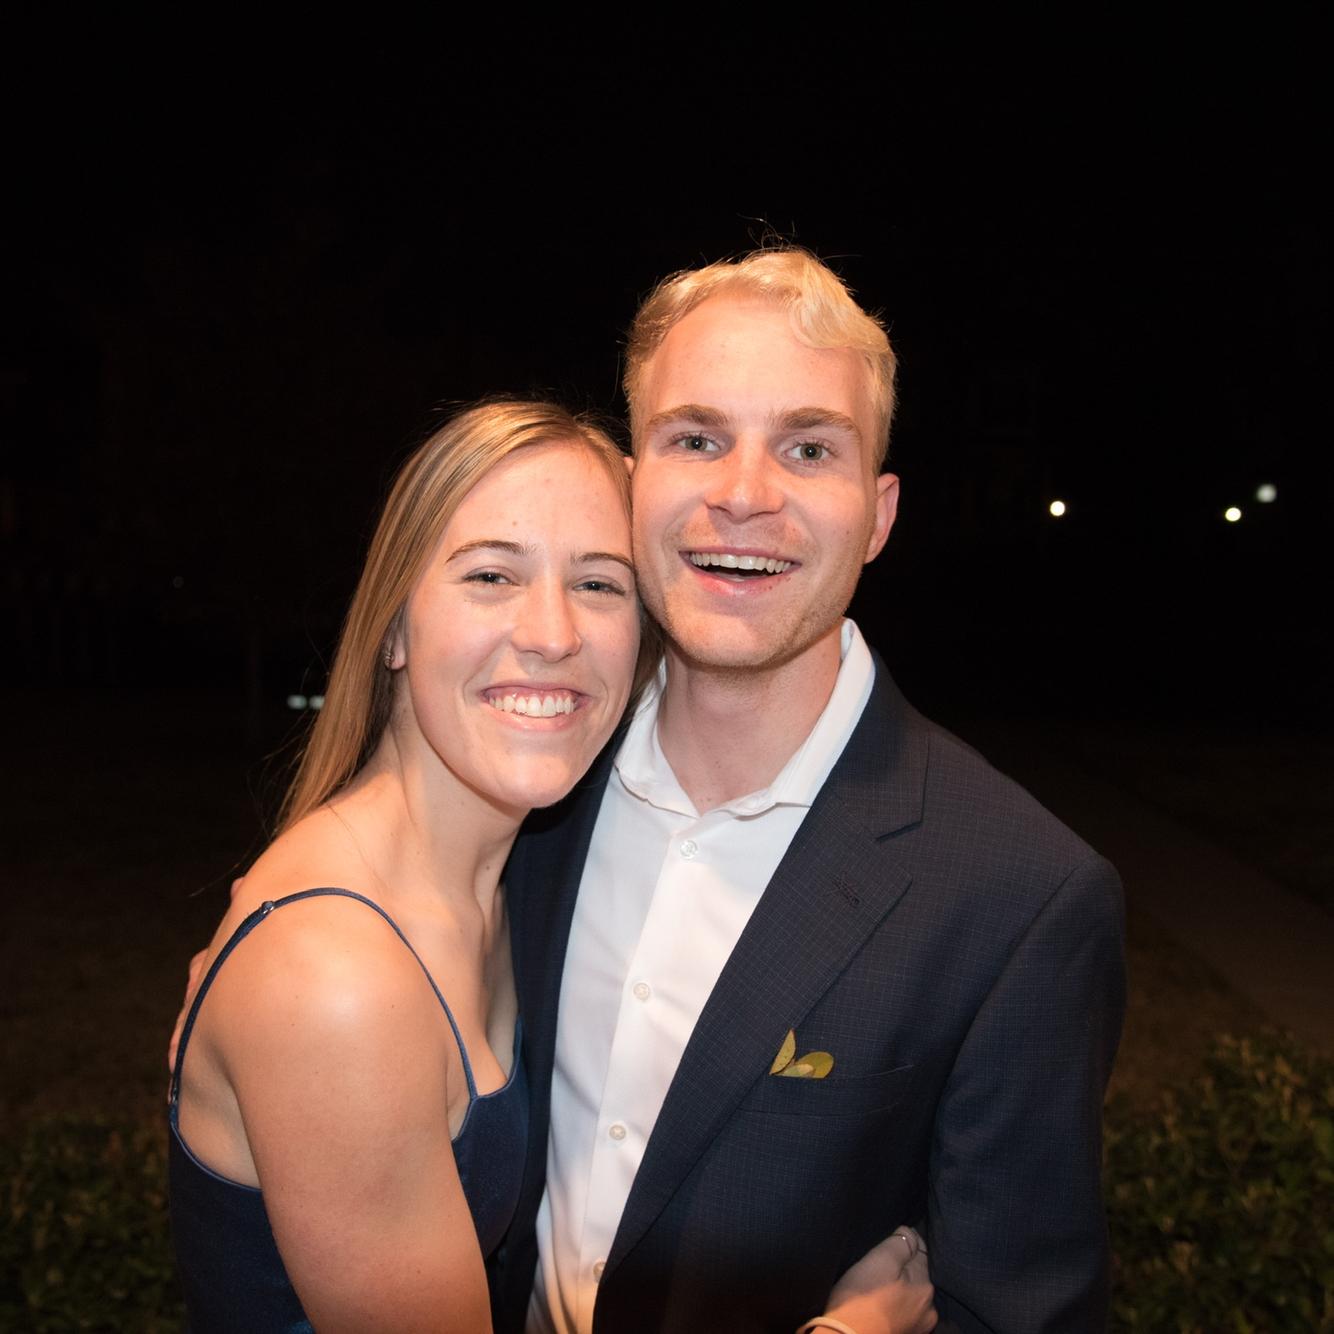 Our First Formal as a couple
2/8/2020